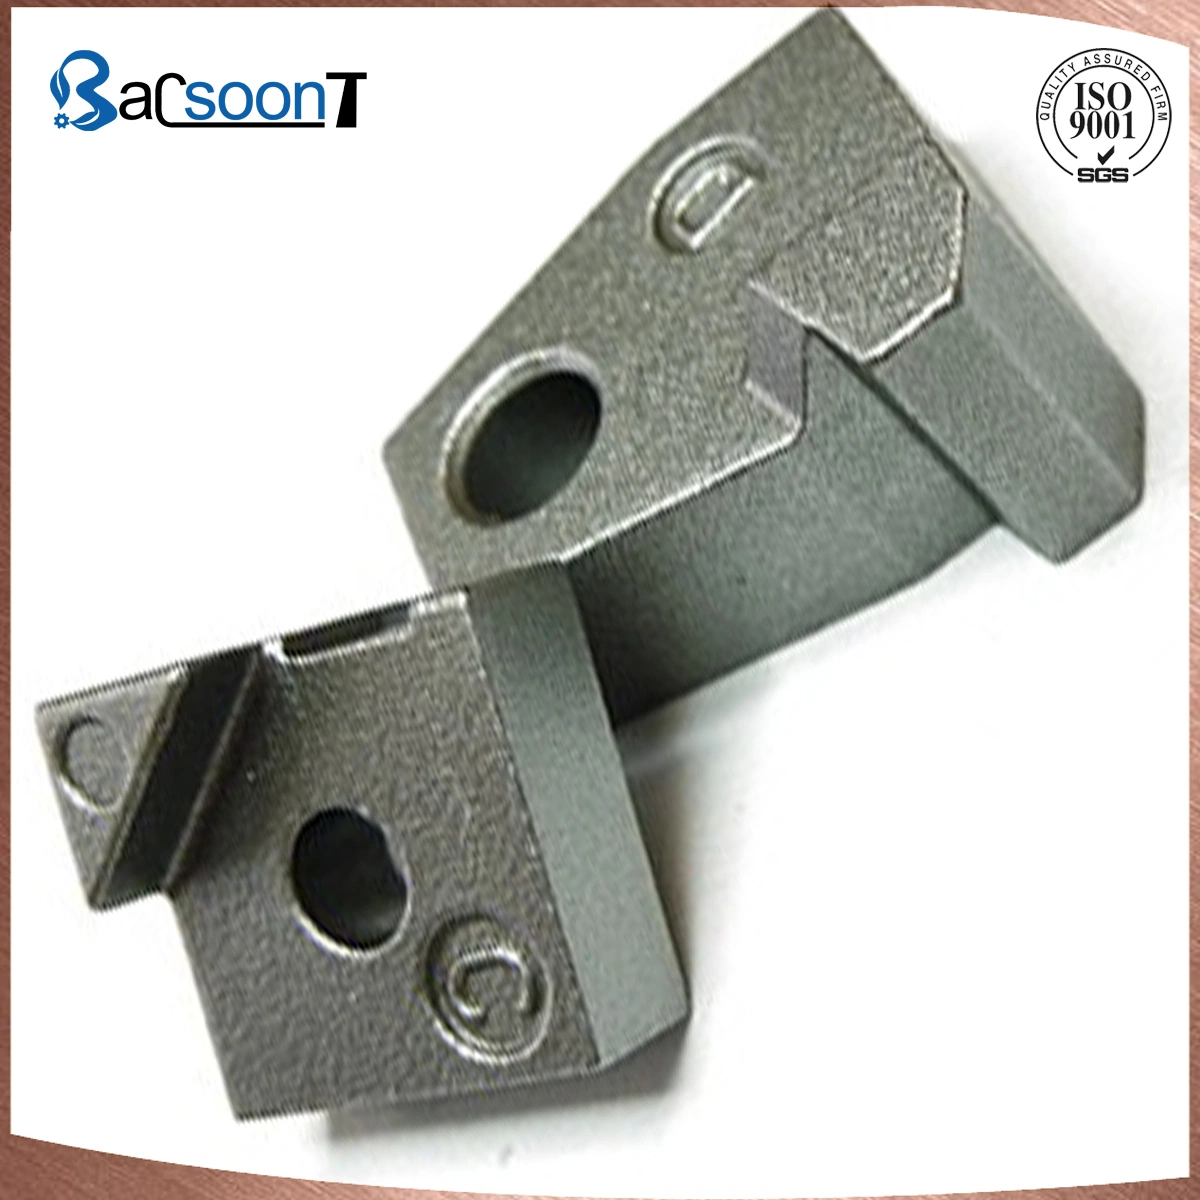 Customized Stainless Steel/Carbon Steel/Steel Lost Wax Casting/Investment Casting Steel Pipe Fitting/Bracket/Flange/Valve Body/Casting with Normalizing in China